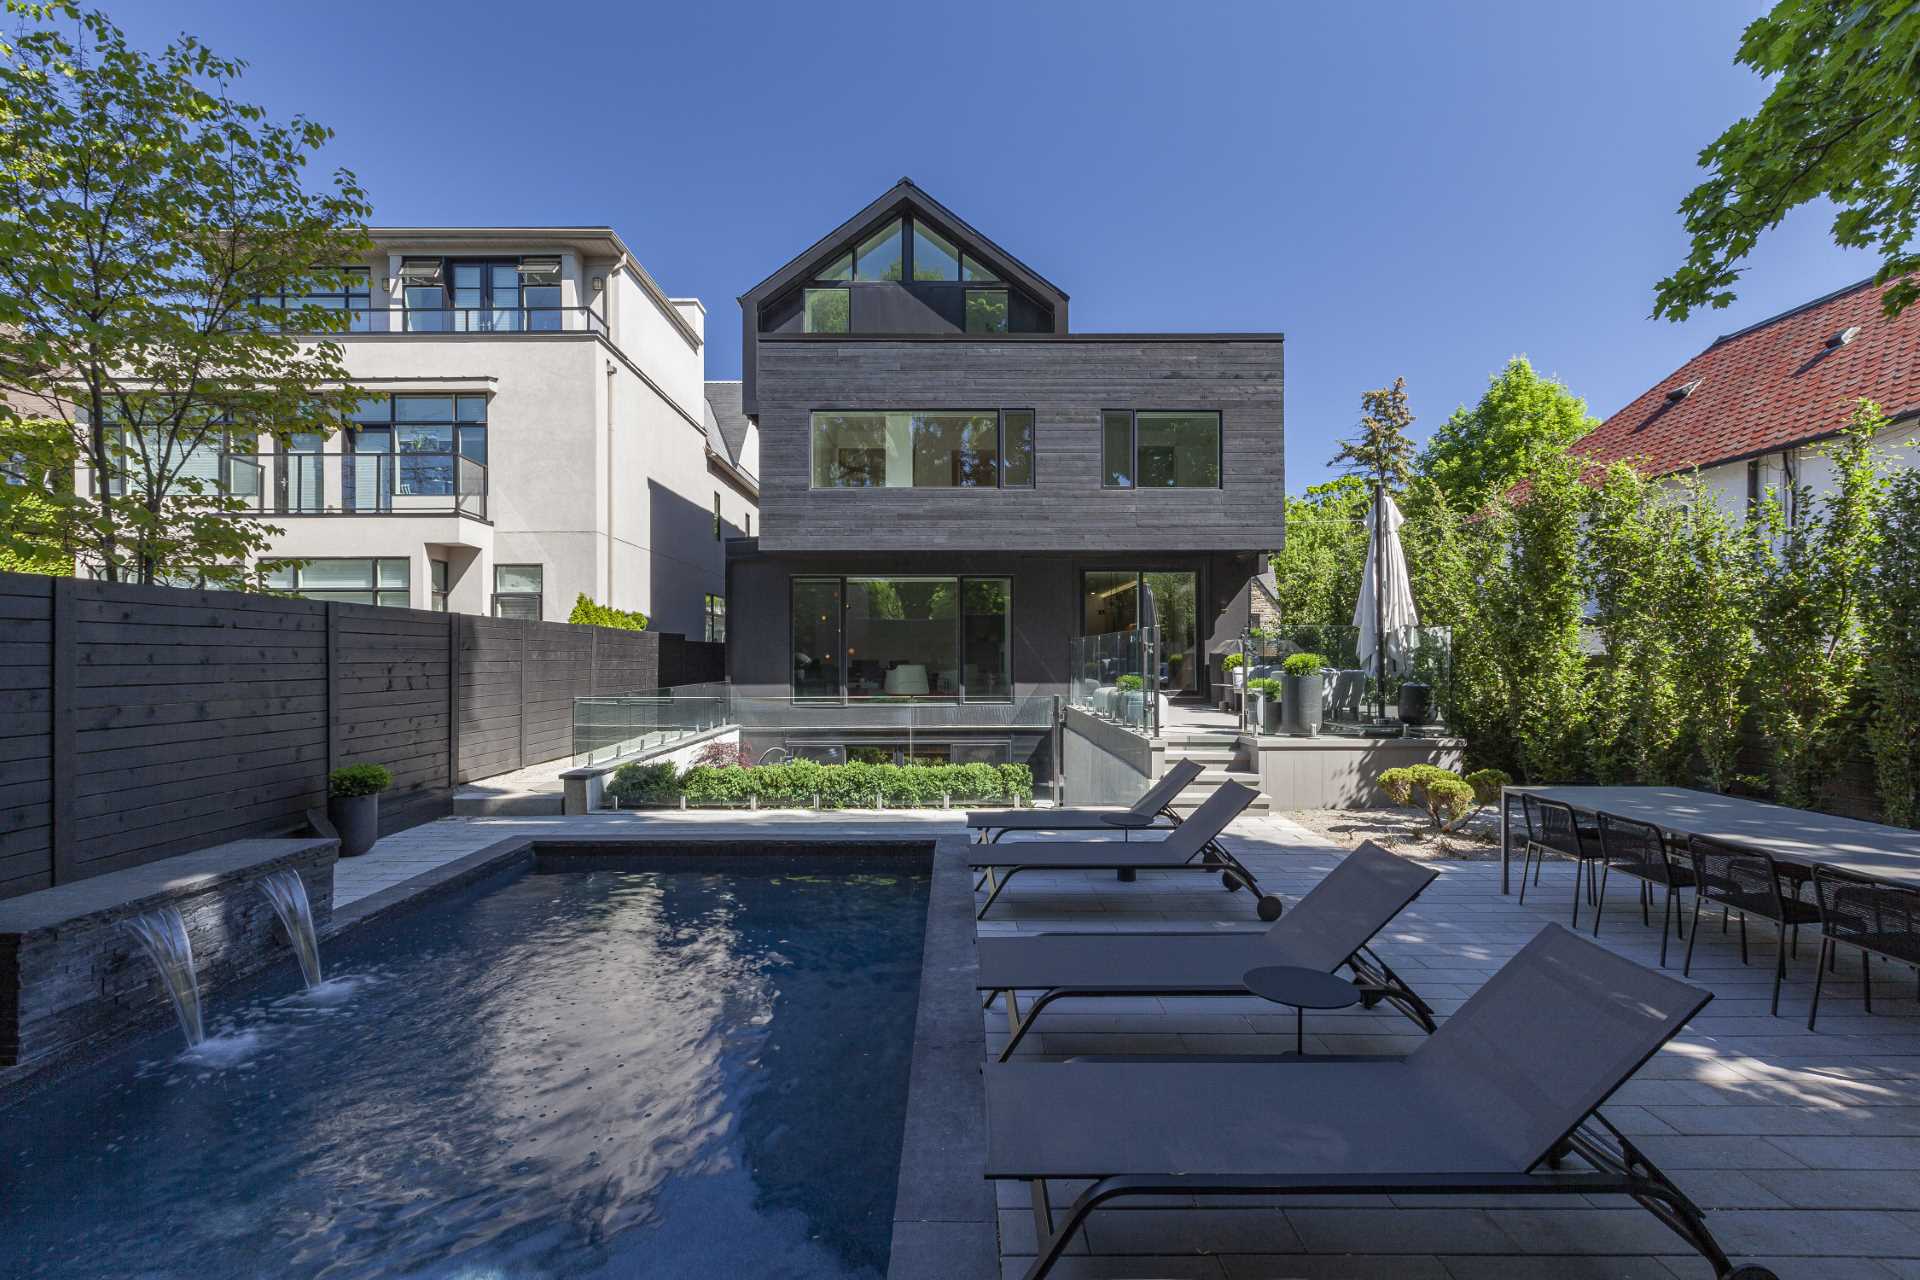 A modern home with a dark grey exterior, also has a swimming pool and patios.